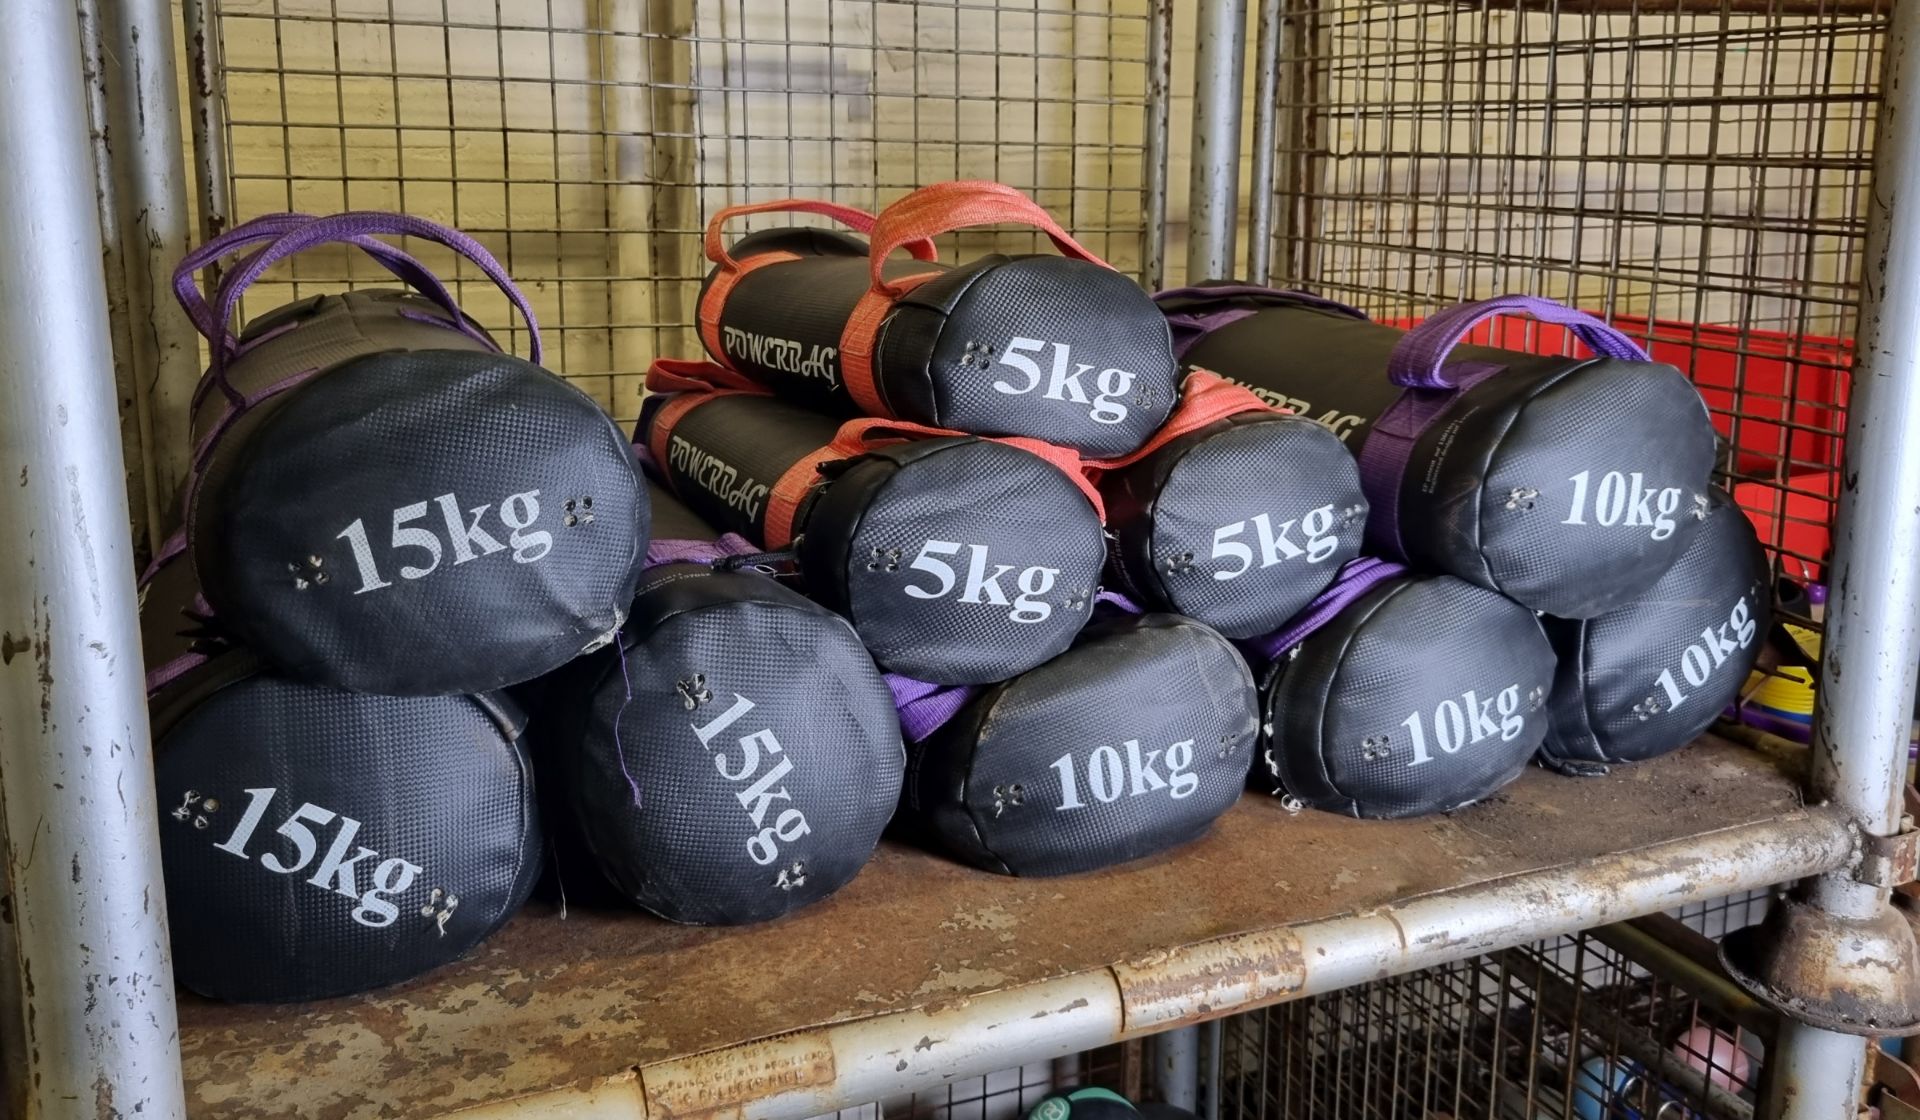 12x exercise powerbags : 3x 5kg, 6x 10kg, 3x 15kg - Image 2 of 3